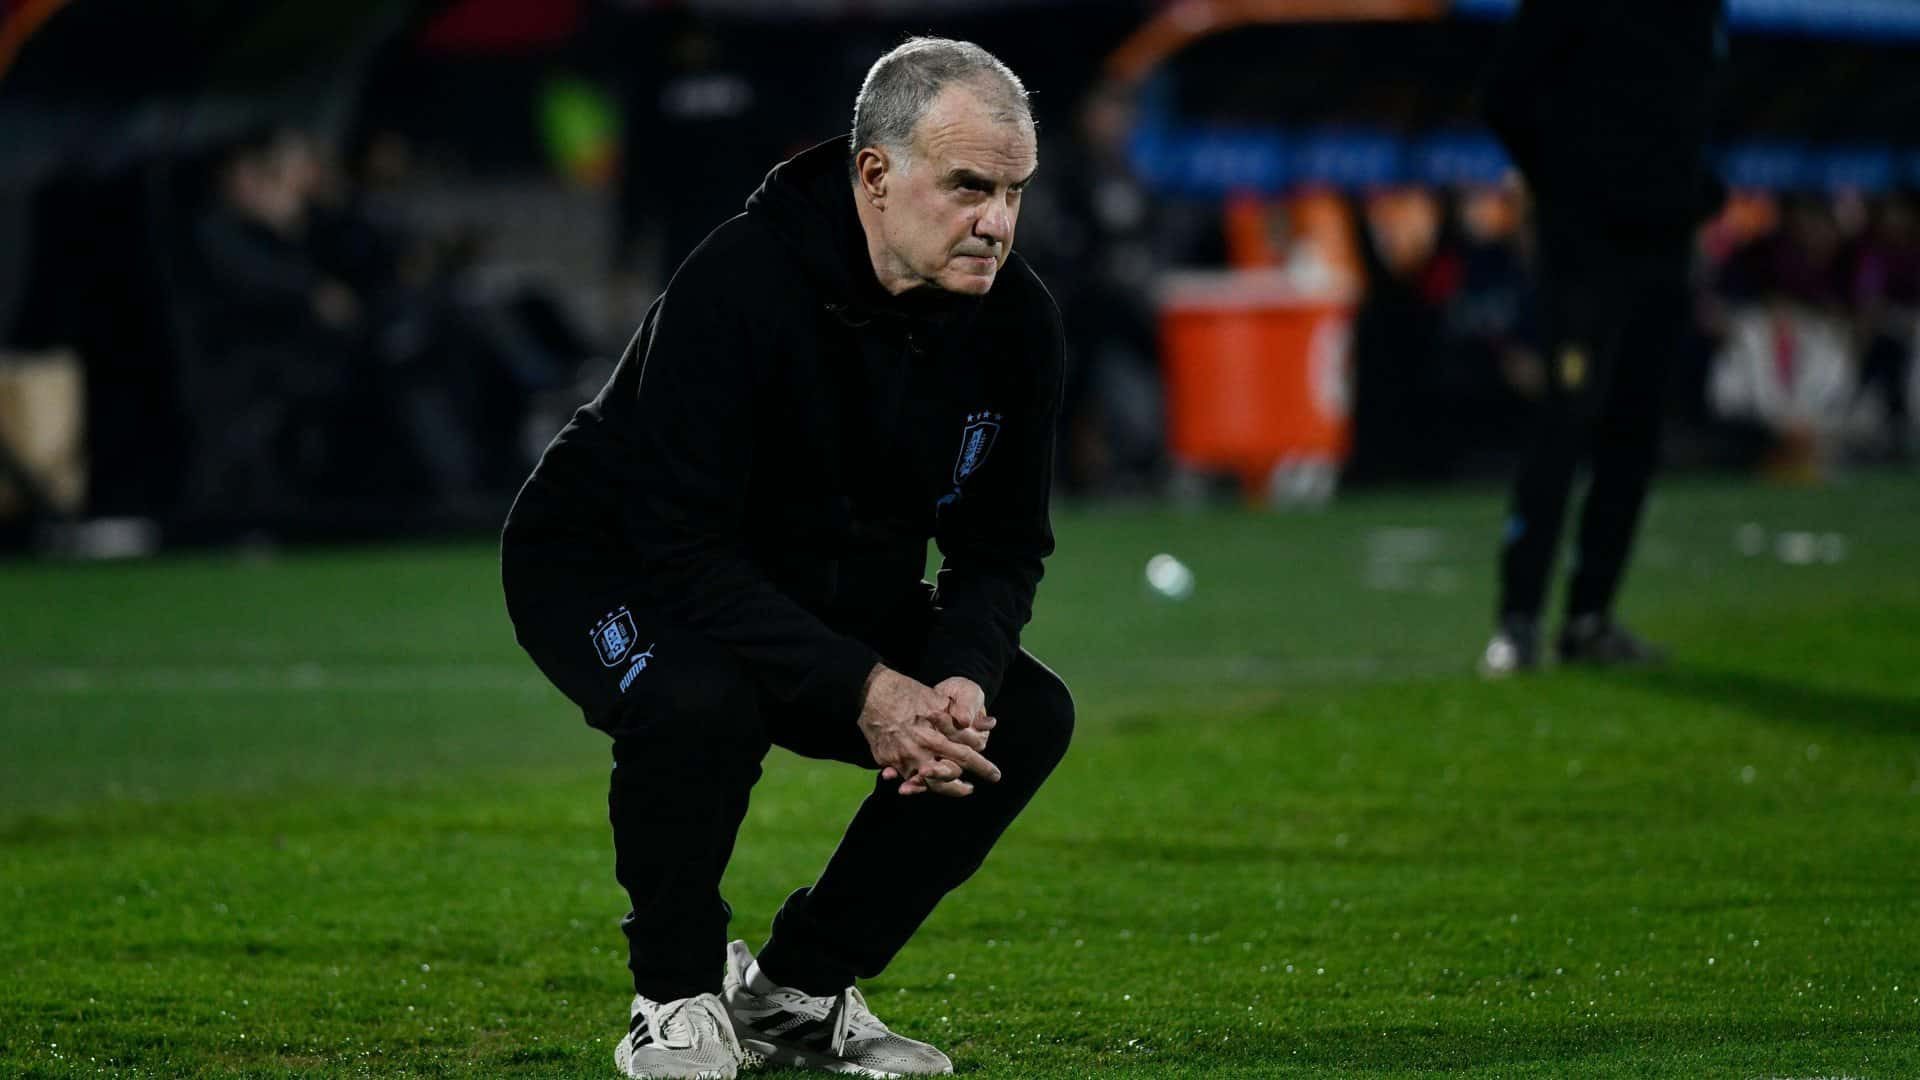 Marcelo Bielsa, in all black with white trainers, crouching on the touchline in typical style during Uruguay vs Chile. Those hamstrings!